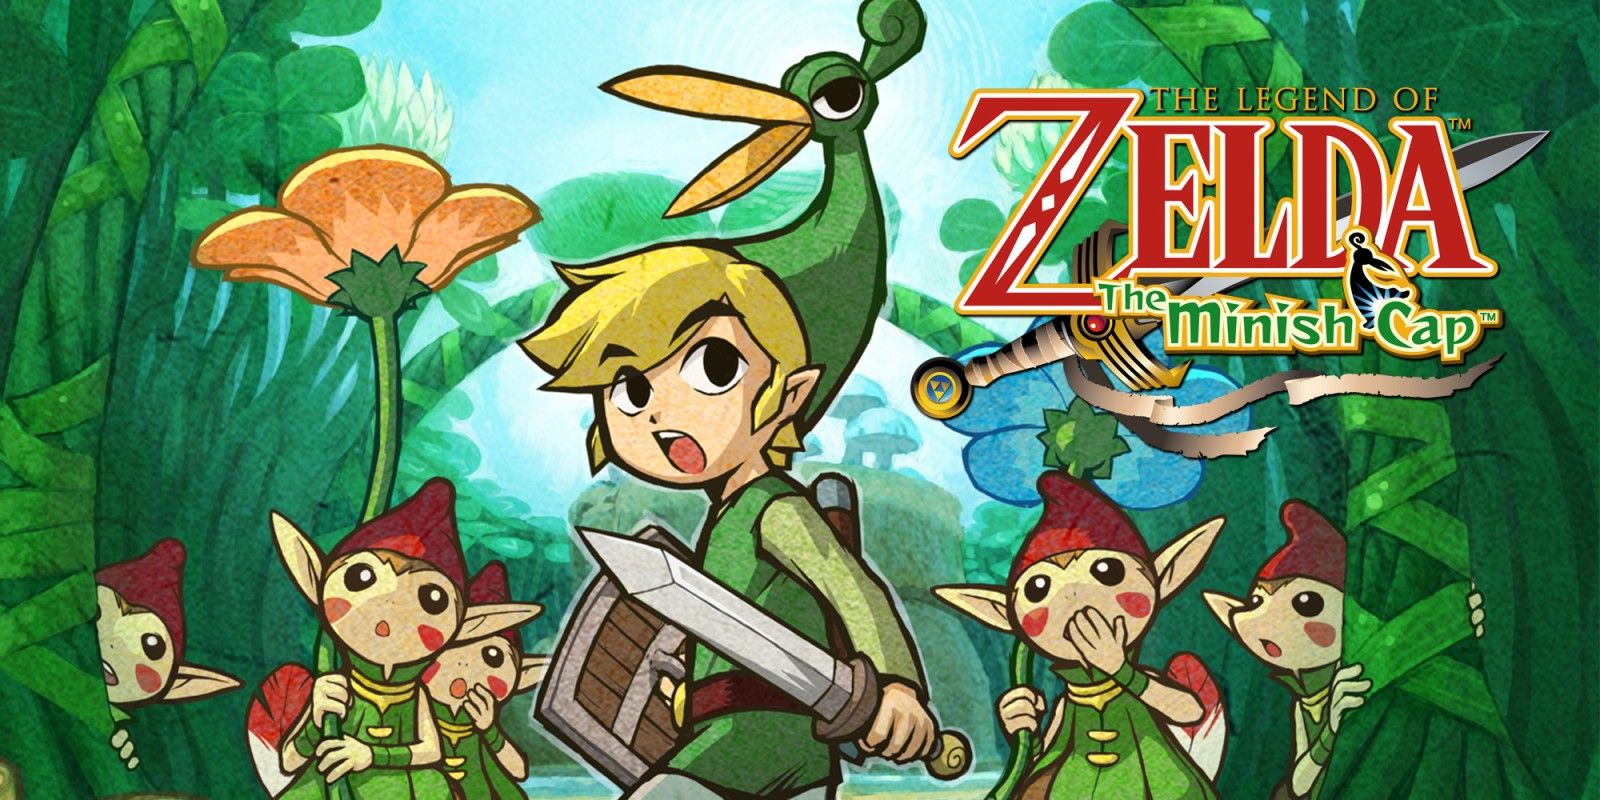 Box art for The Legend of Zelda: The Minish Cap, showing Link wearing the eponymous cap surrounded by Minish characters.